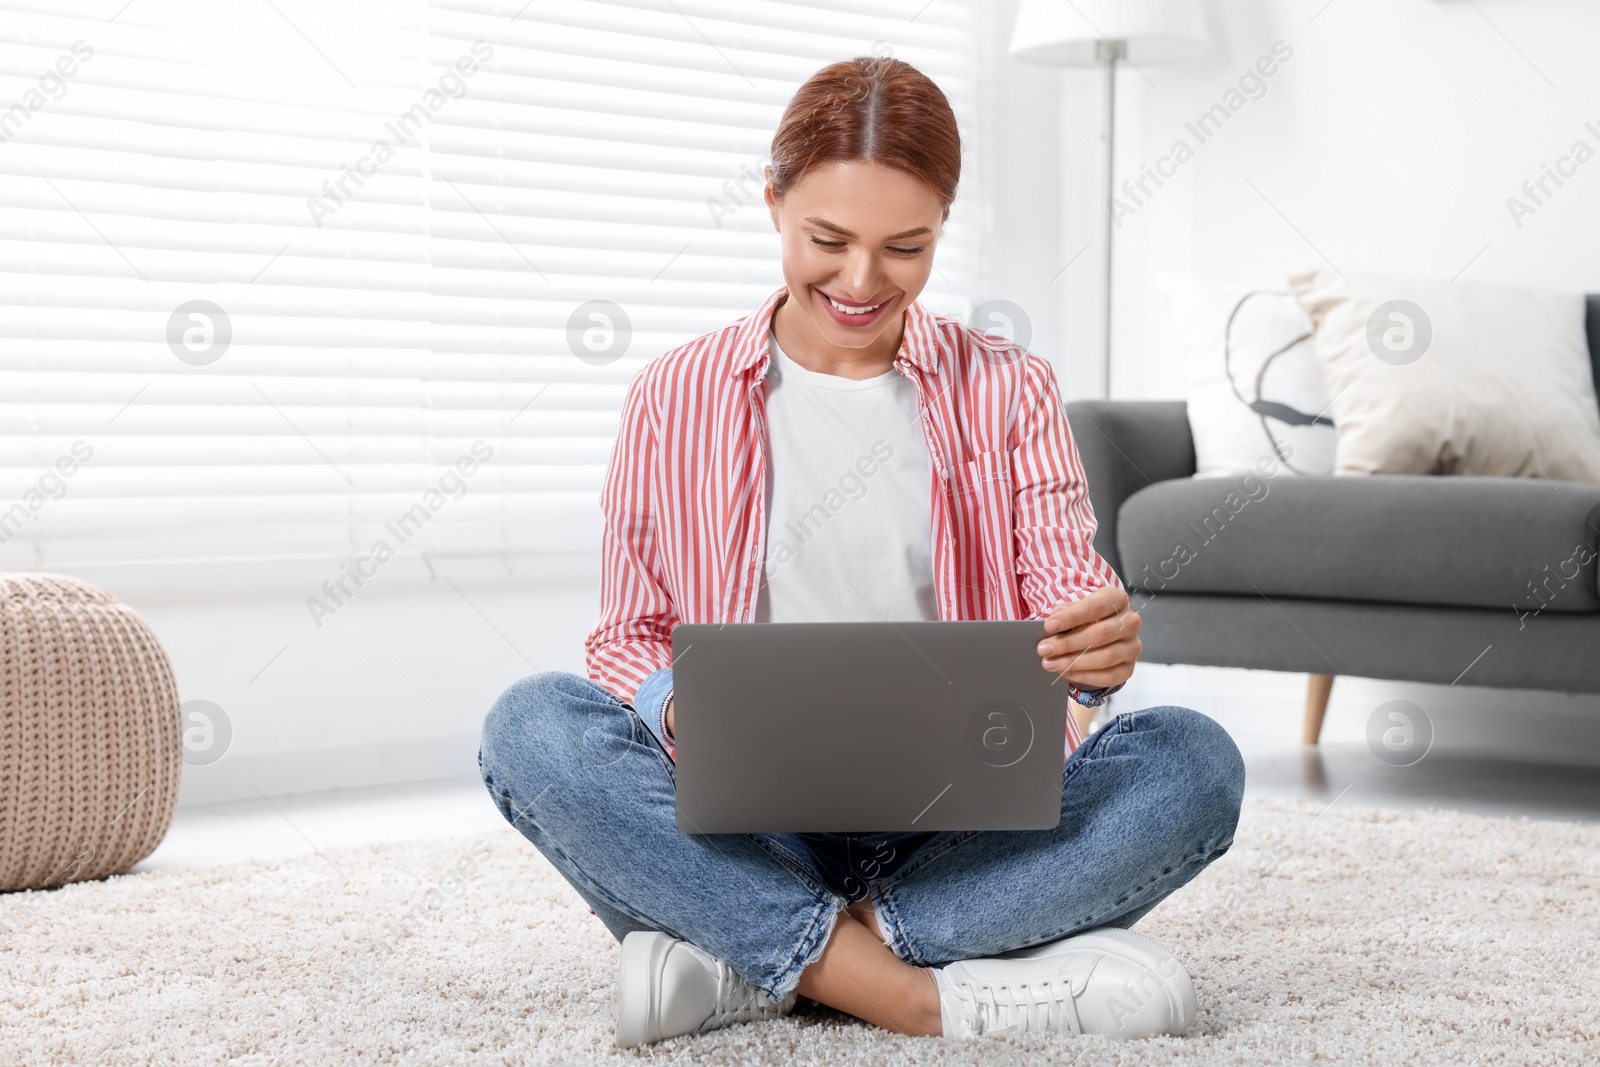 Photo of Woman having video chat via laptop at home